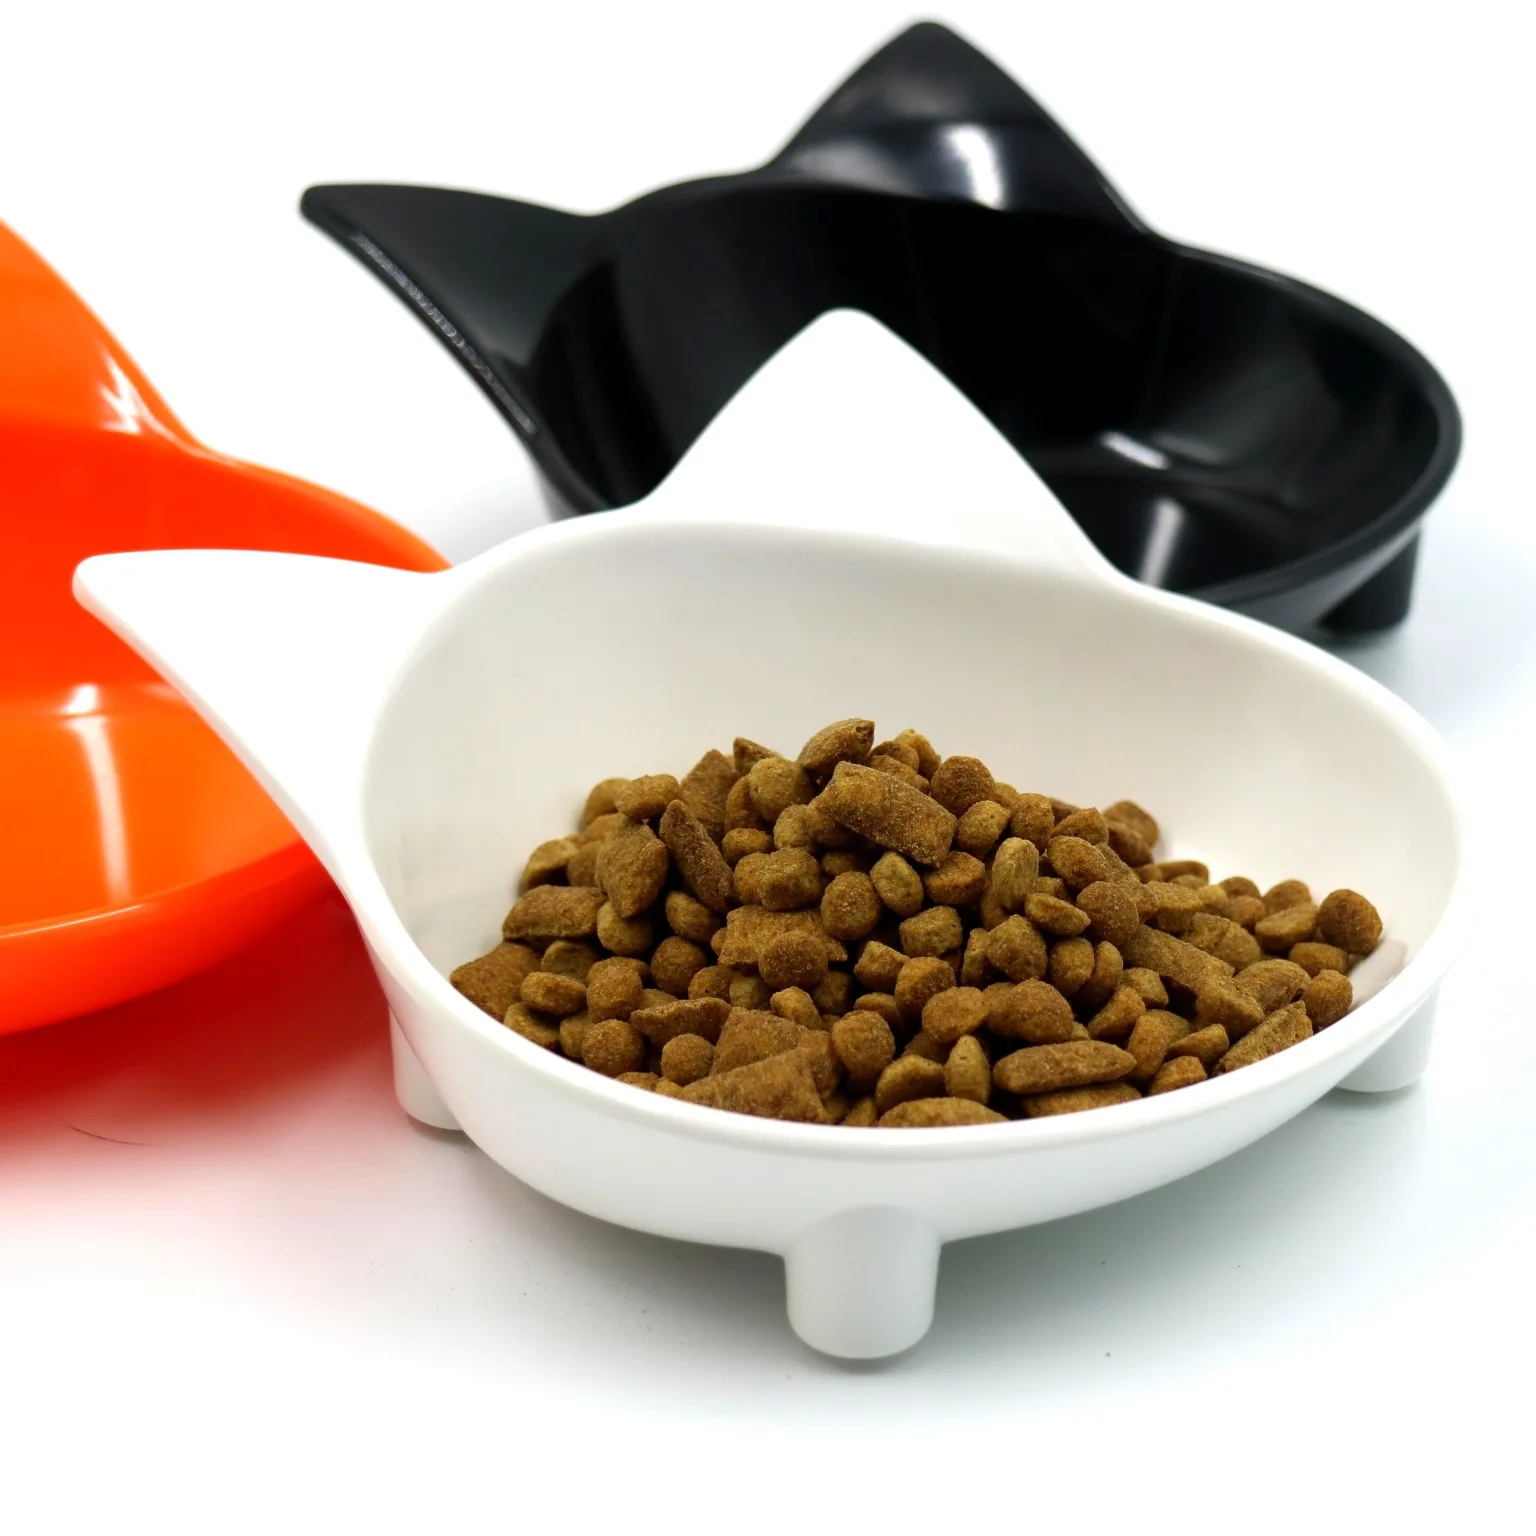 

Non Slip Cat Bowl for Pet Food - Shallow Design for Fatigue Relief - Durable and Stylish Pet Bowl